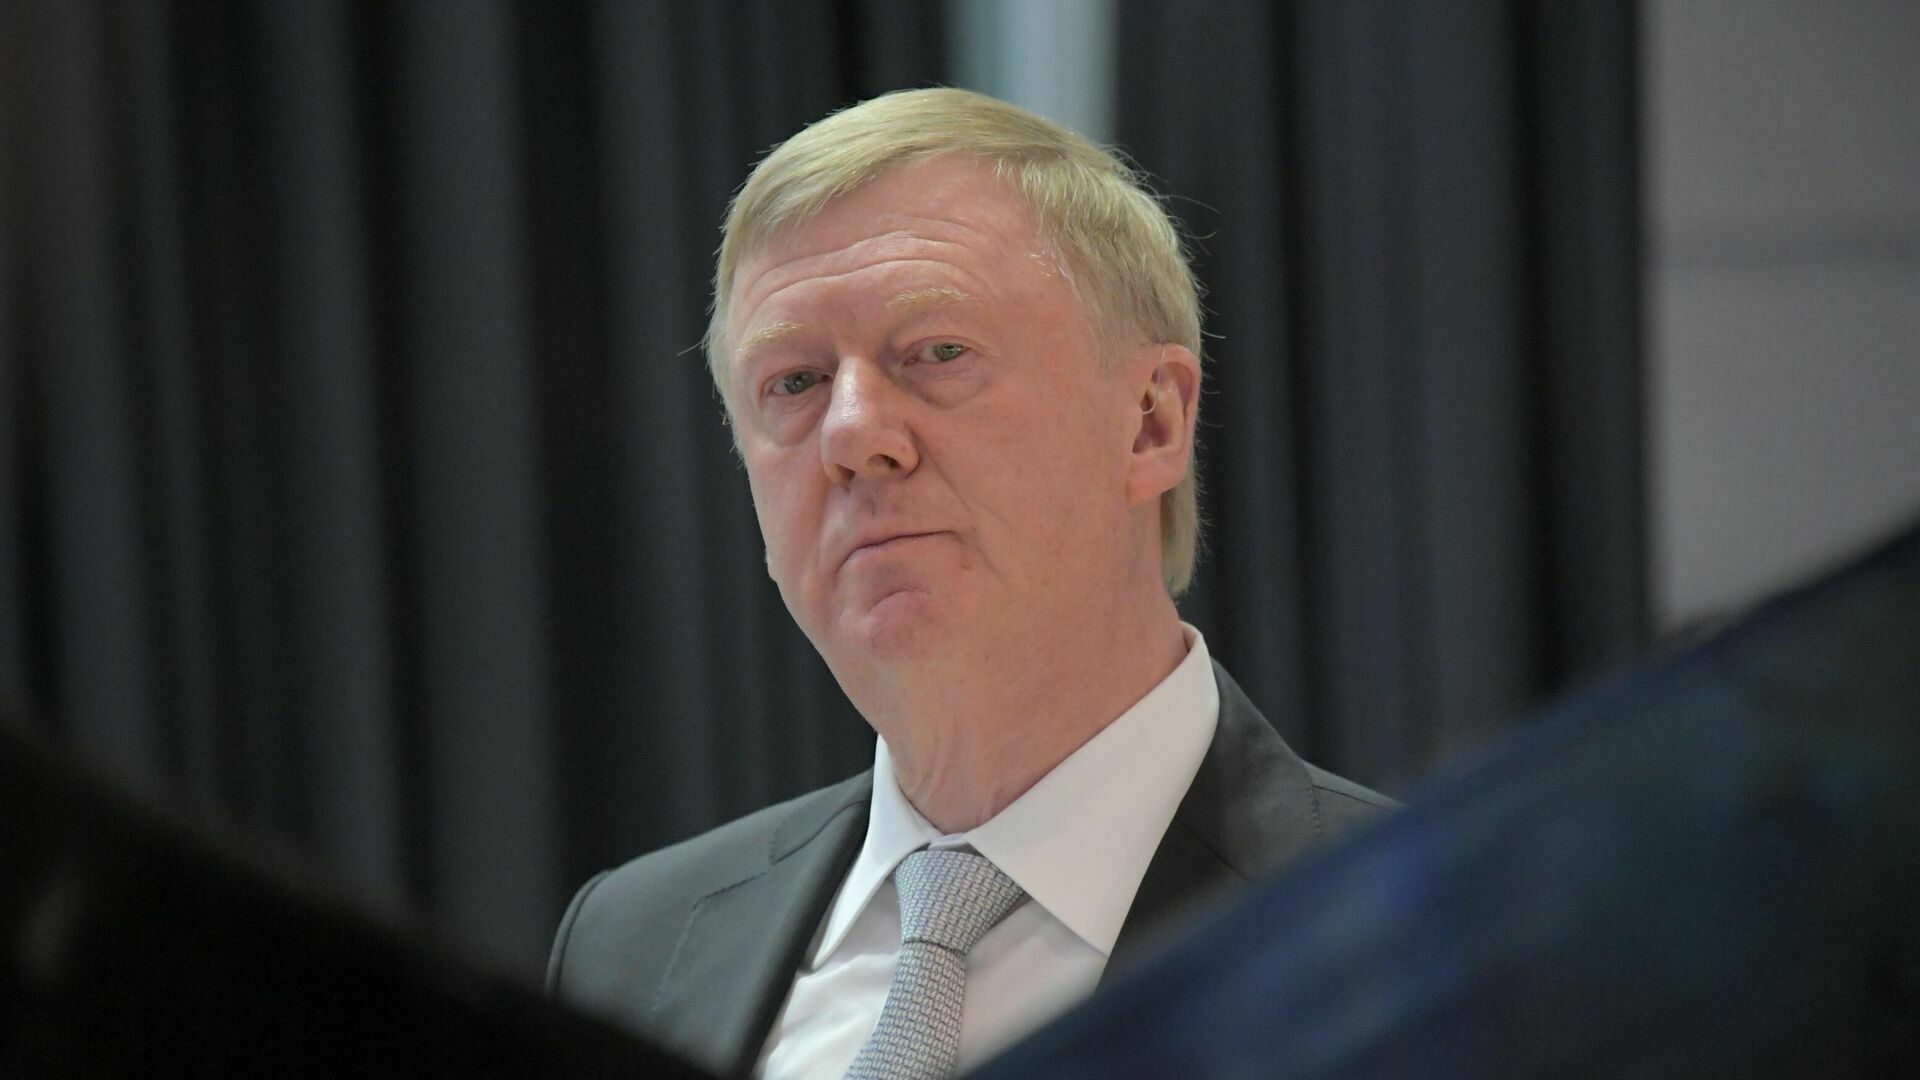 Media: Anatoly Chubais was discharged from the hospital